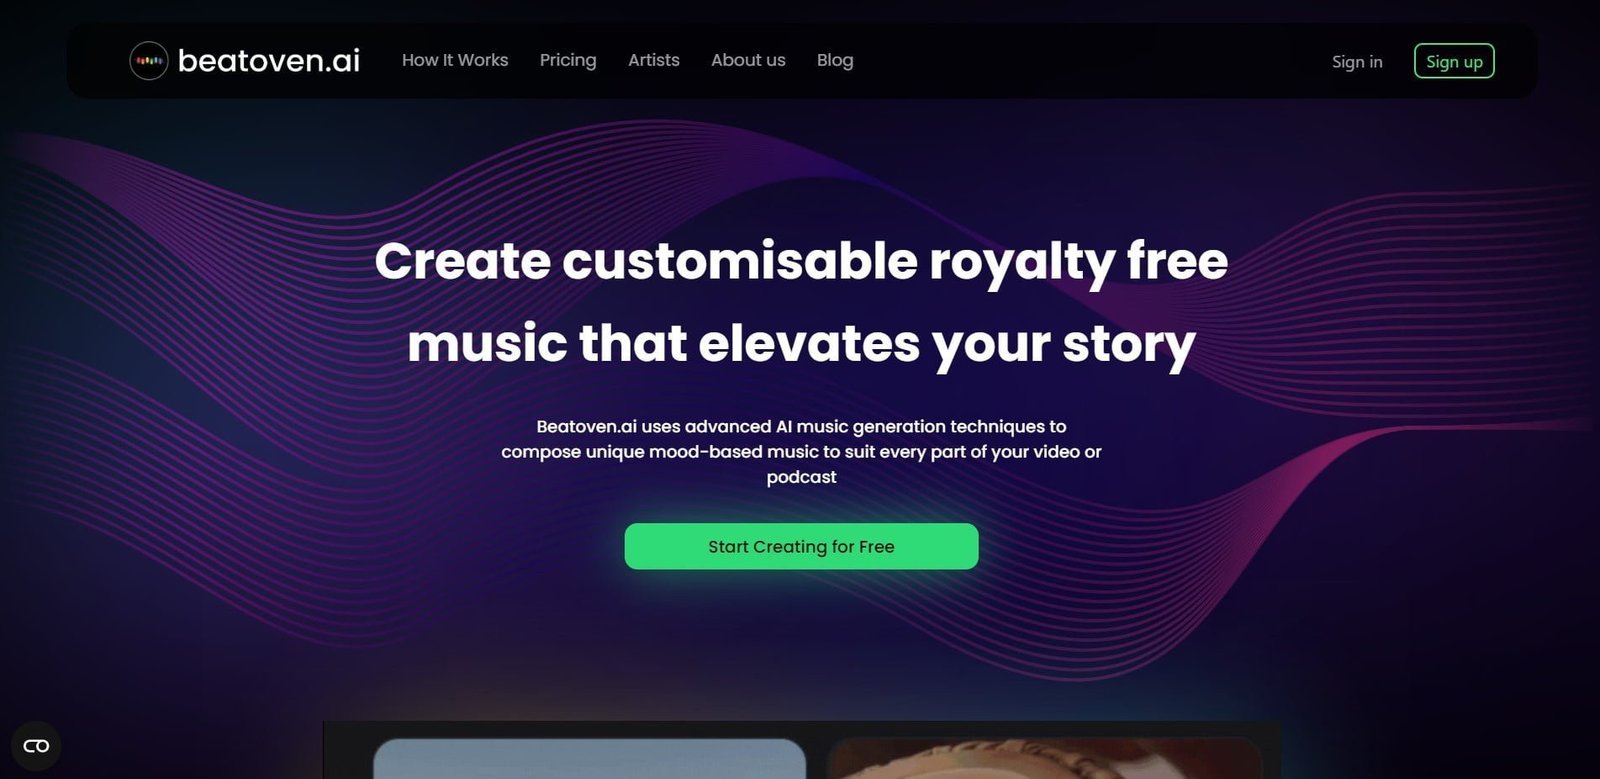 Beatoven.ai is a popular music generator AI that allows users to compose royalty-free music tailored for videos